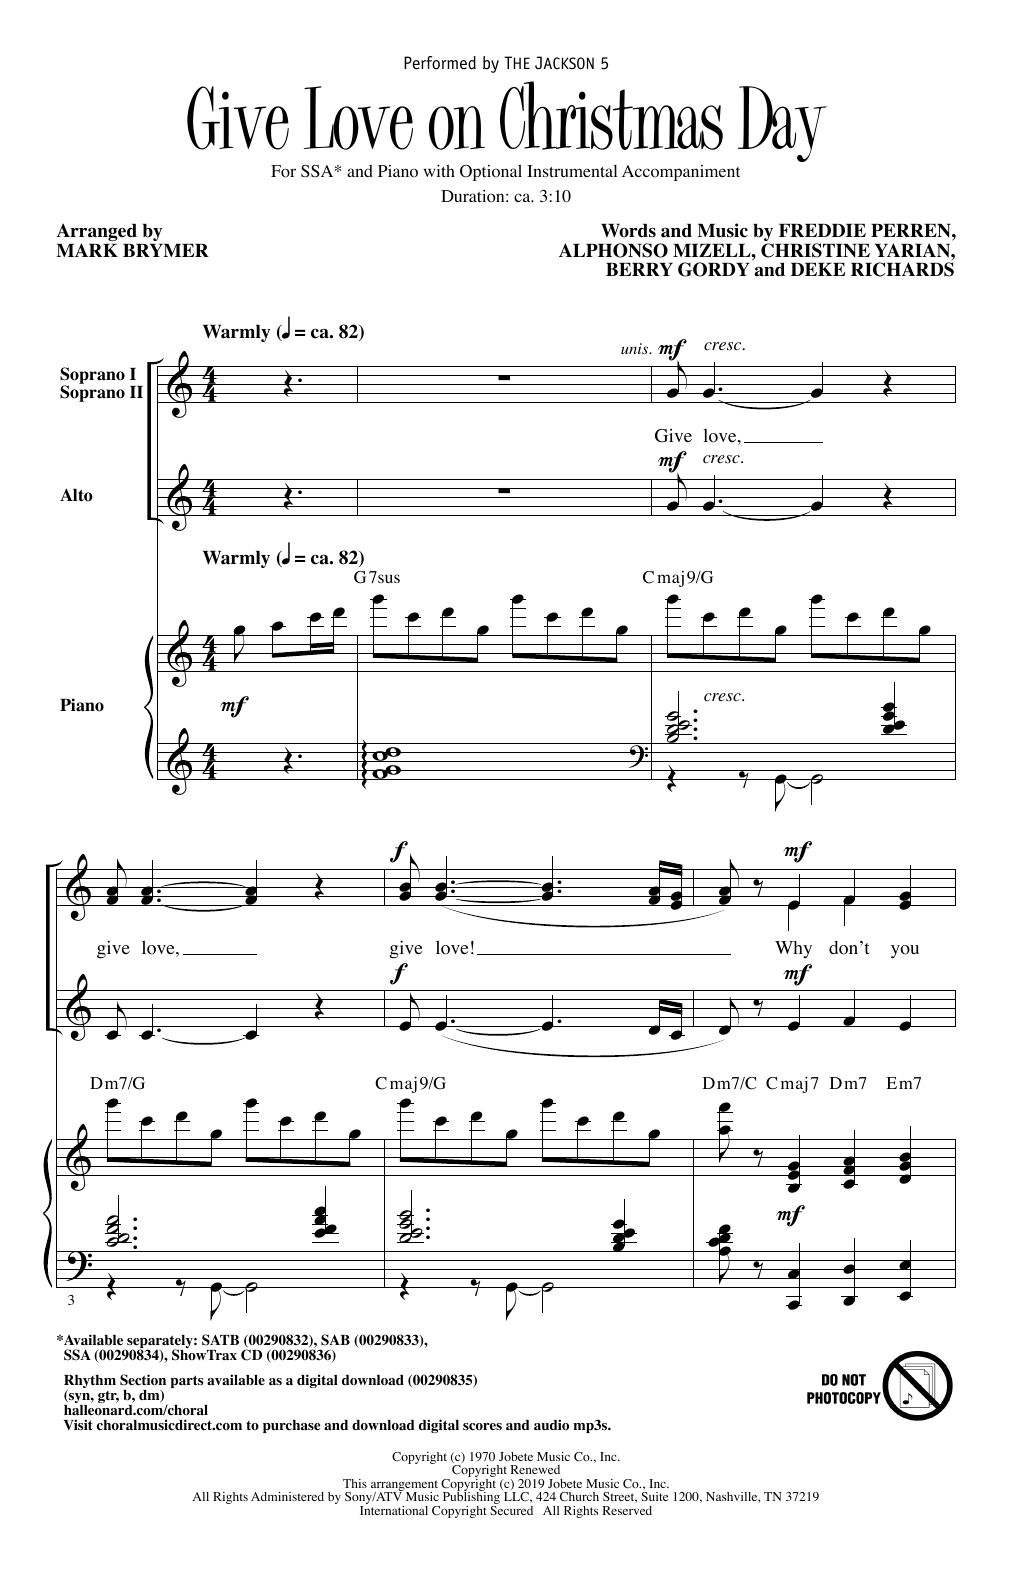 Download The Jackson 5 Give Love On Christmas Day (arr. Mark B Sheet Music